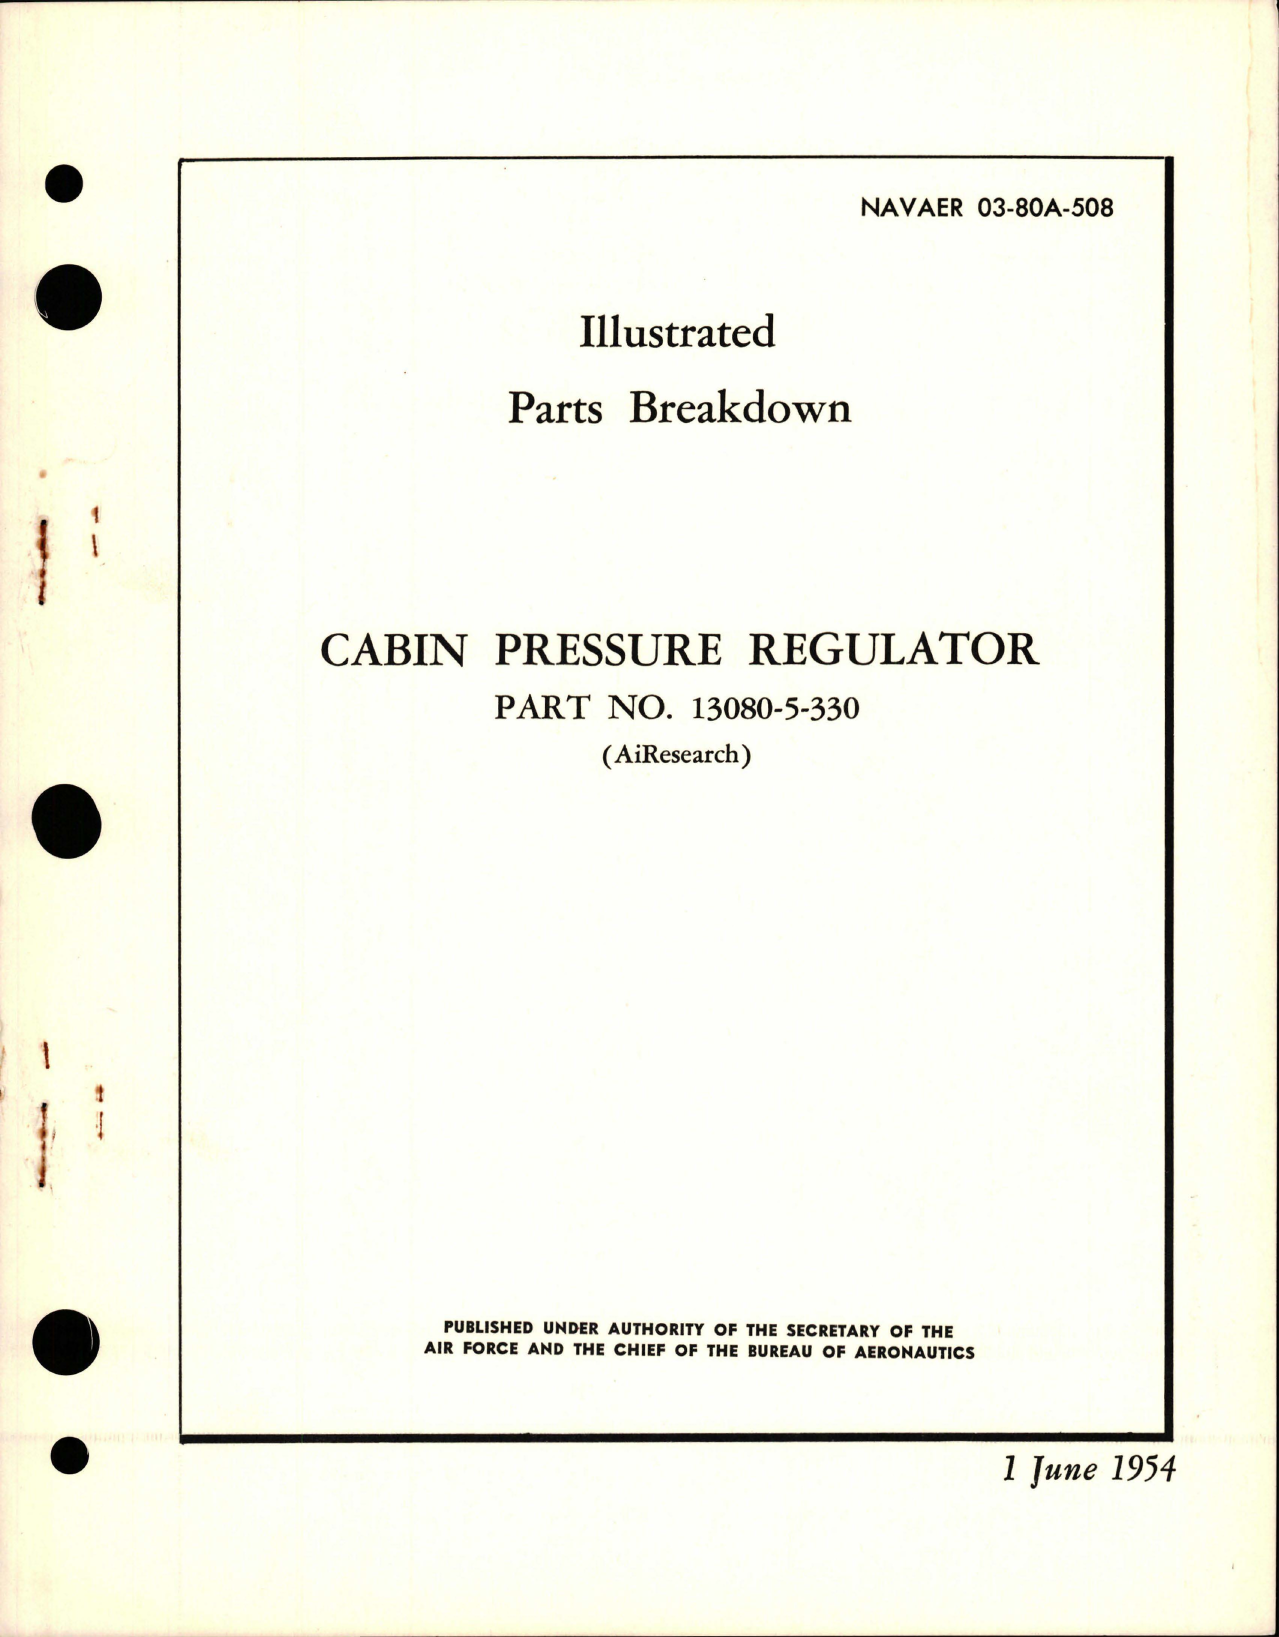 Sample page 1 from AirCorps Library document: Illustrated Parts Breakdown for Cabin Pressure Regulator - Part 13080-5-330 